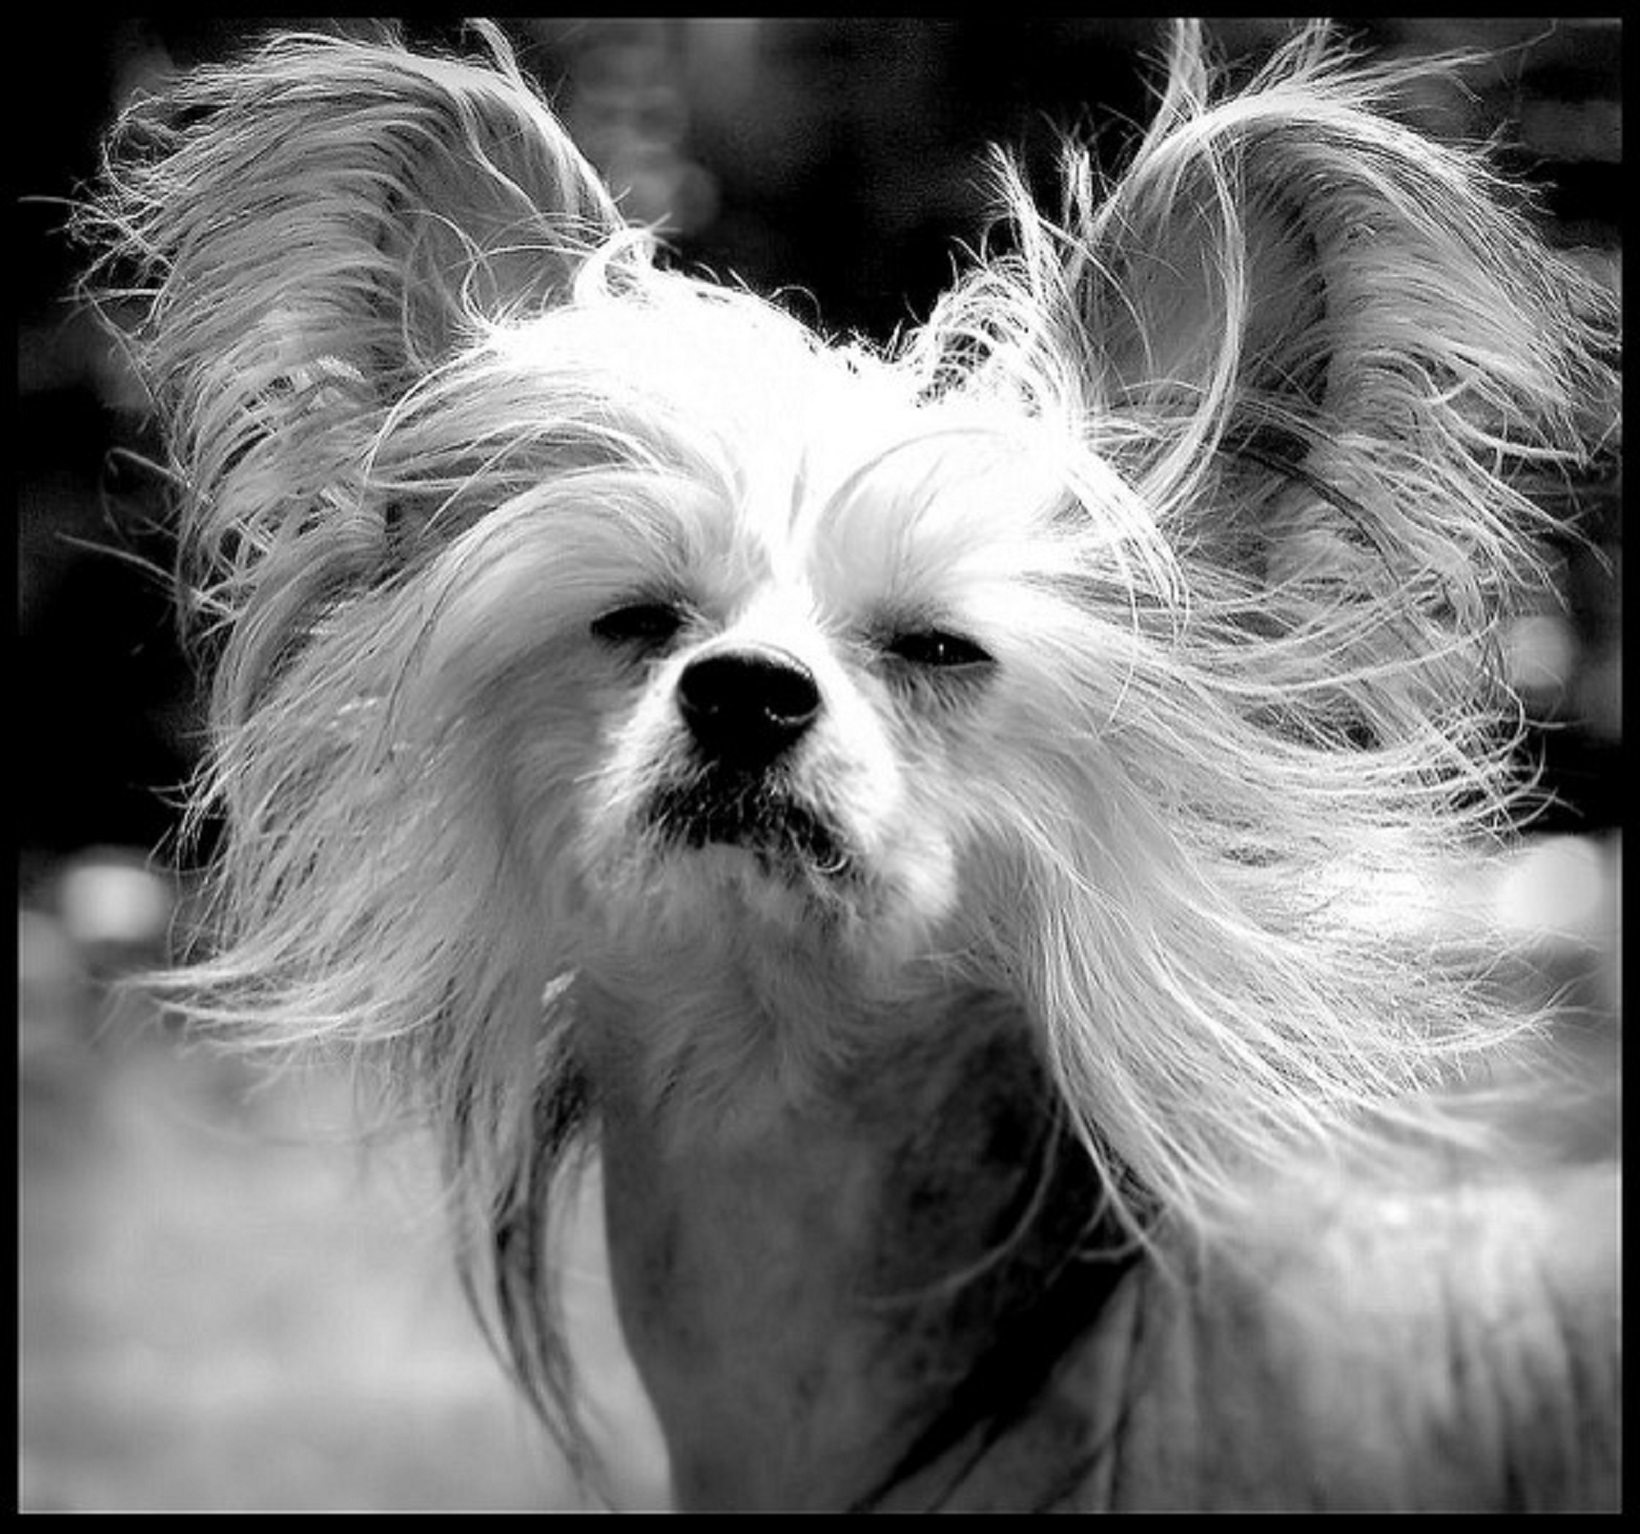 Chinese Crested good apartment dog